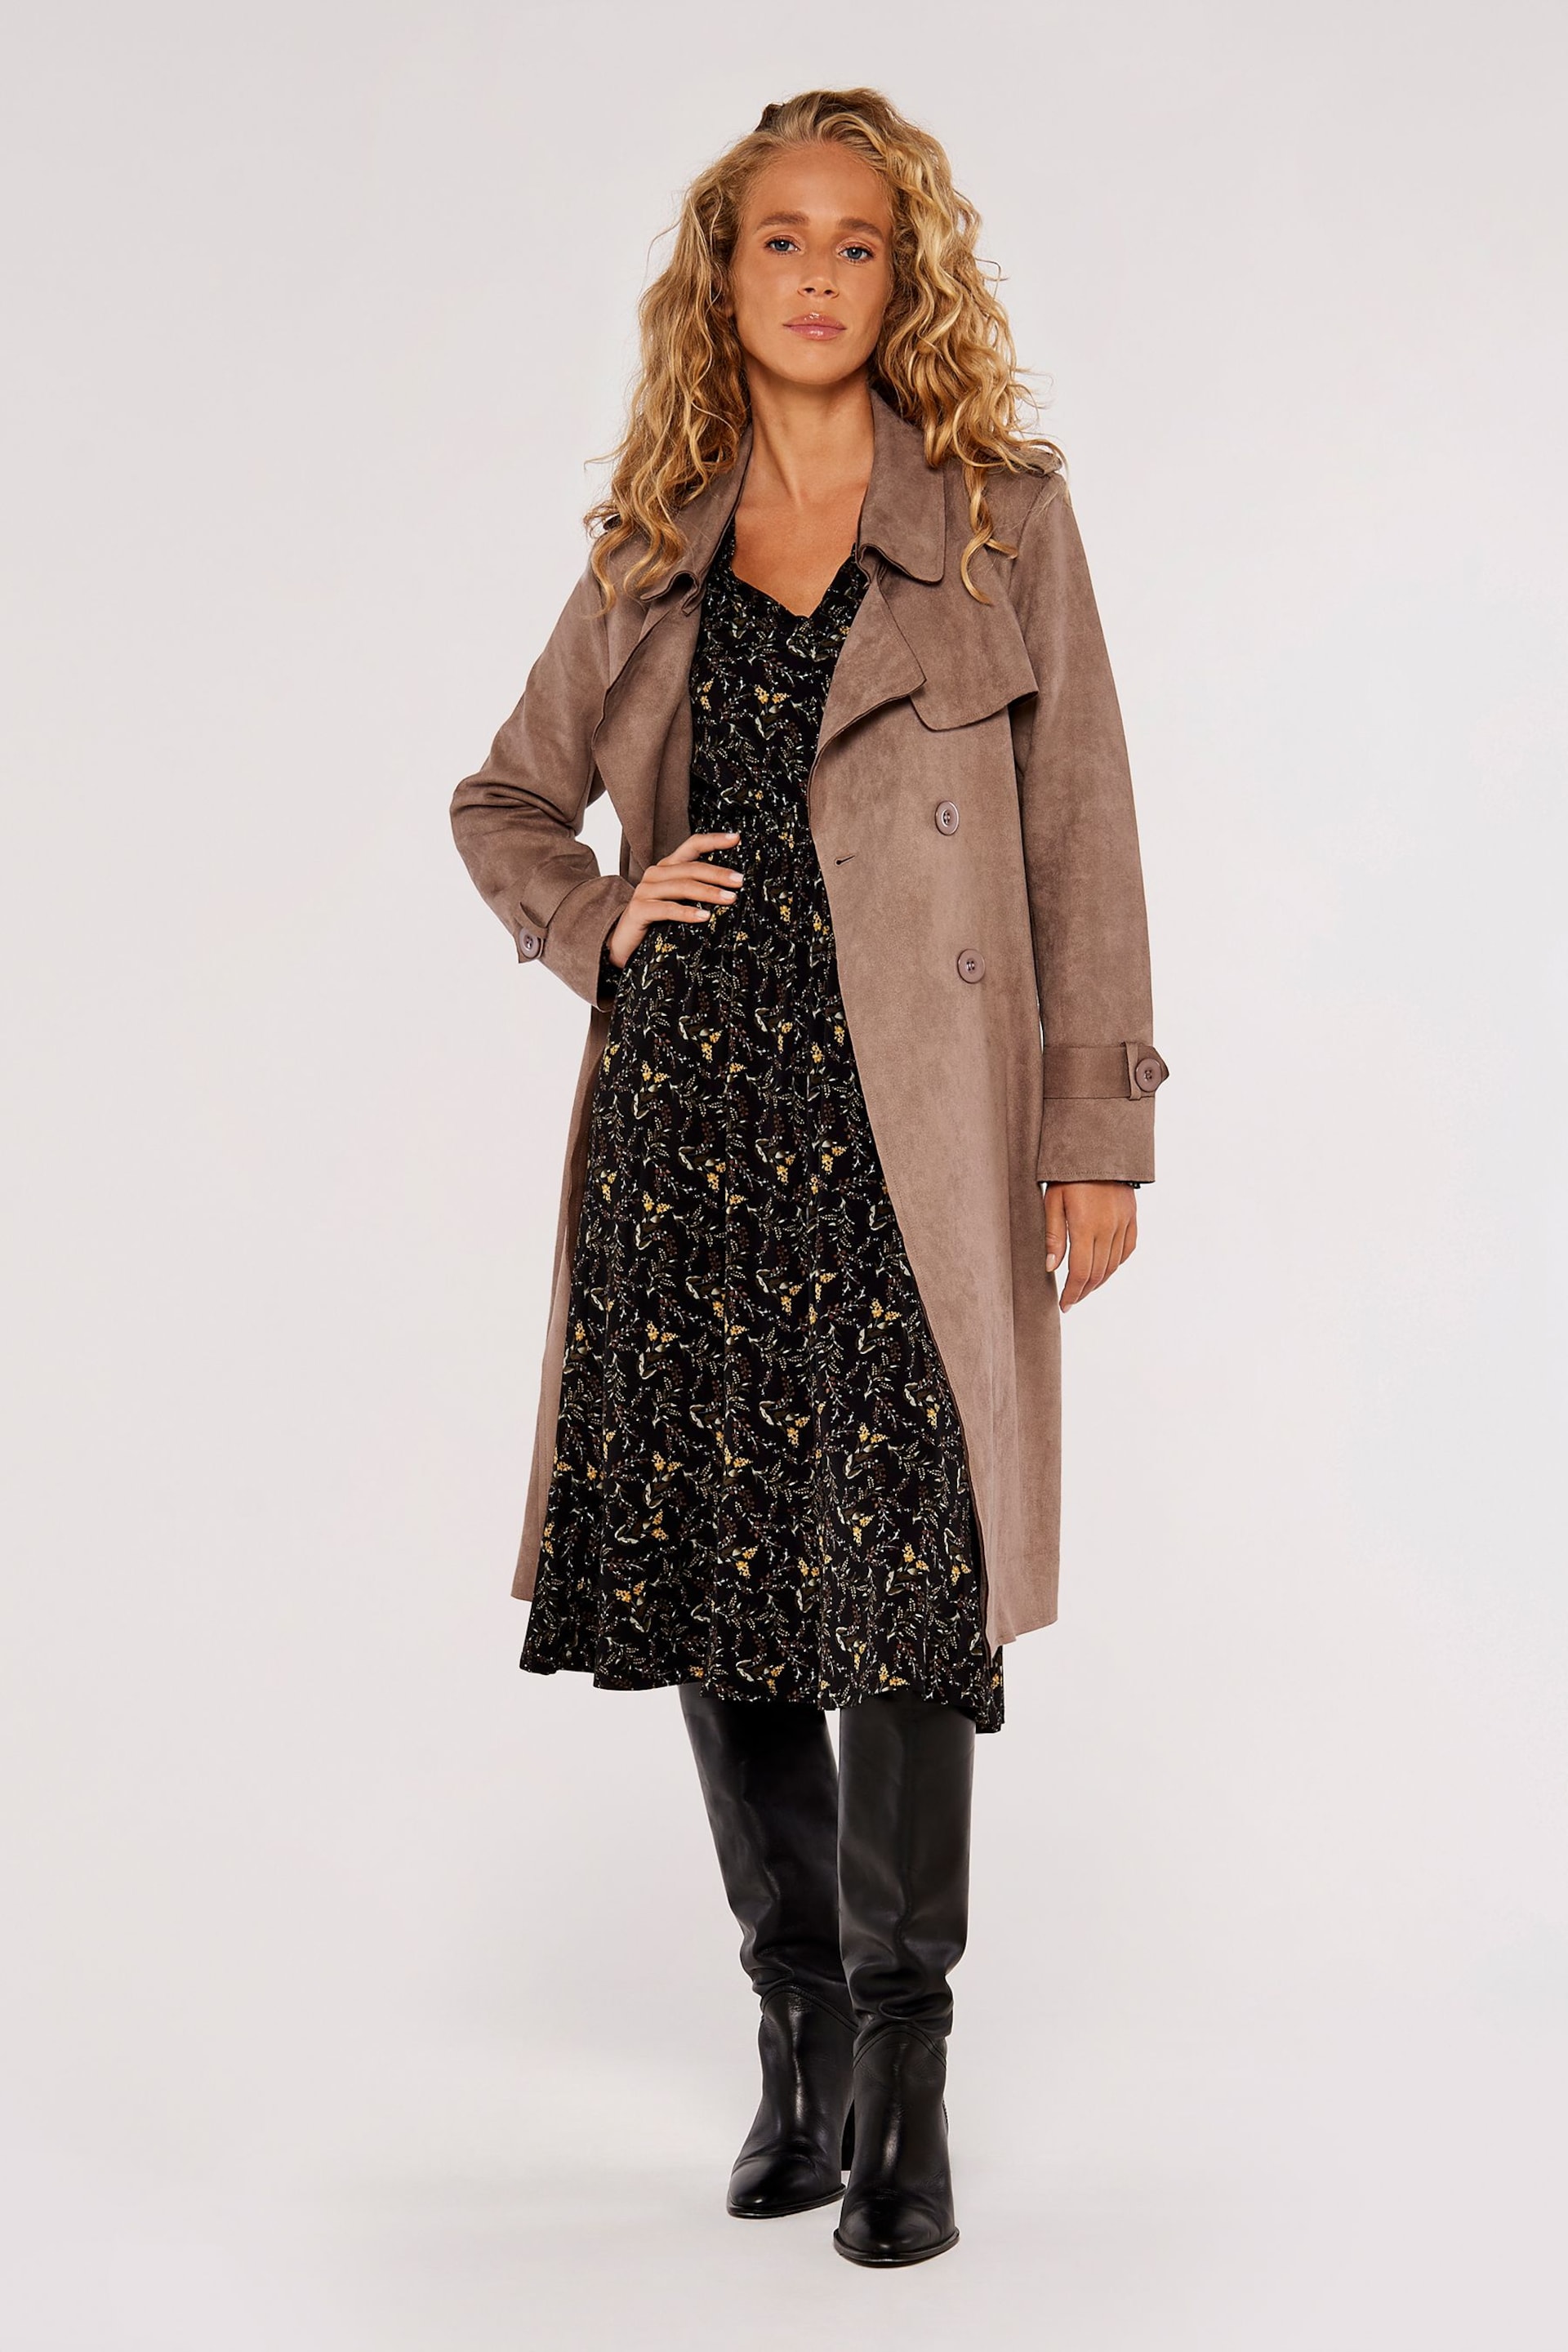 Apricot Brown Faux Suede Double Breasted Trench Coat - Image 1 of 4